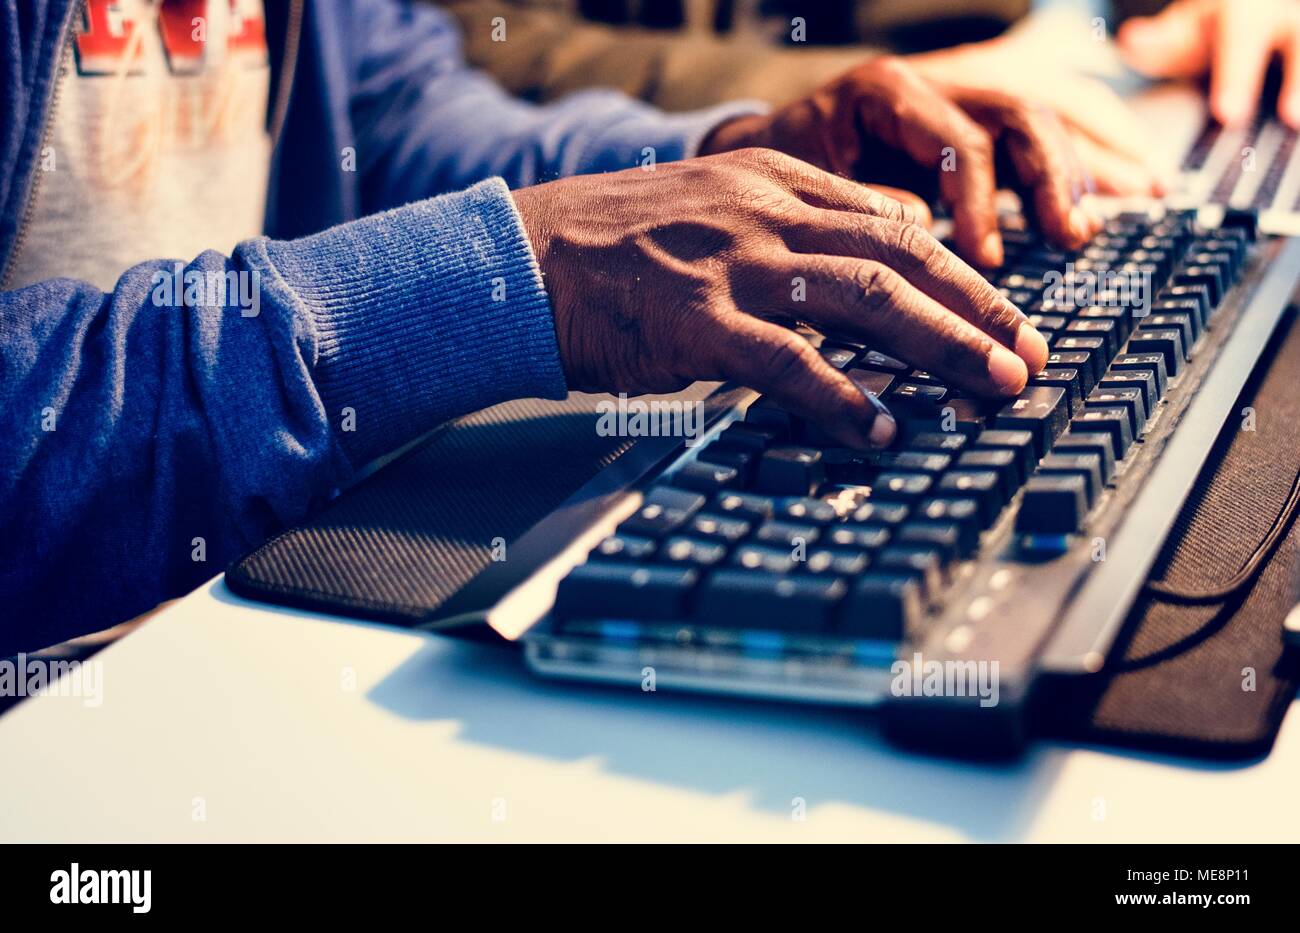 Closeup of hands working on computer keyboard Stock Photo